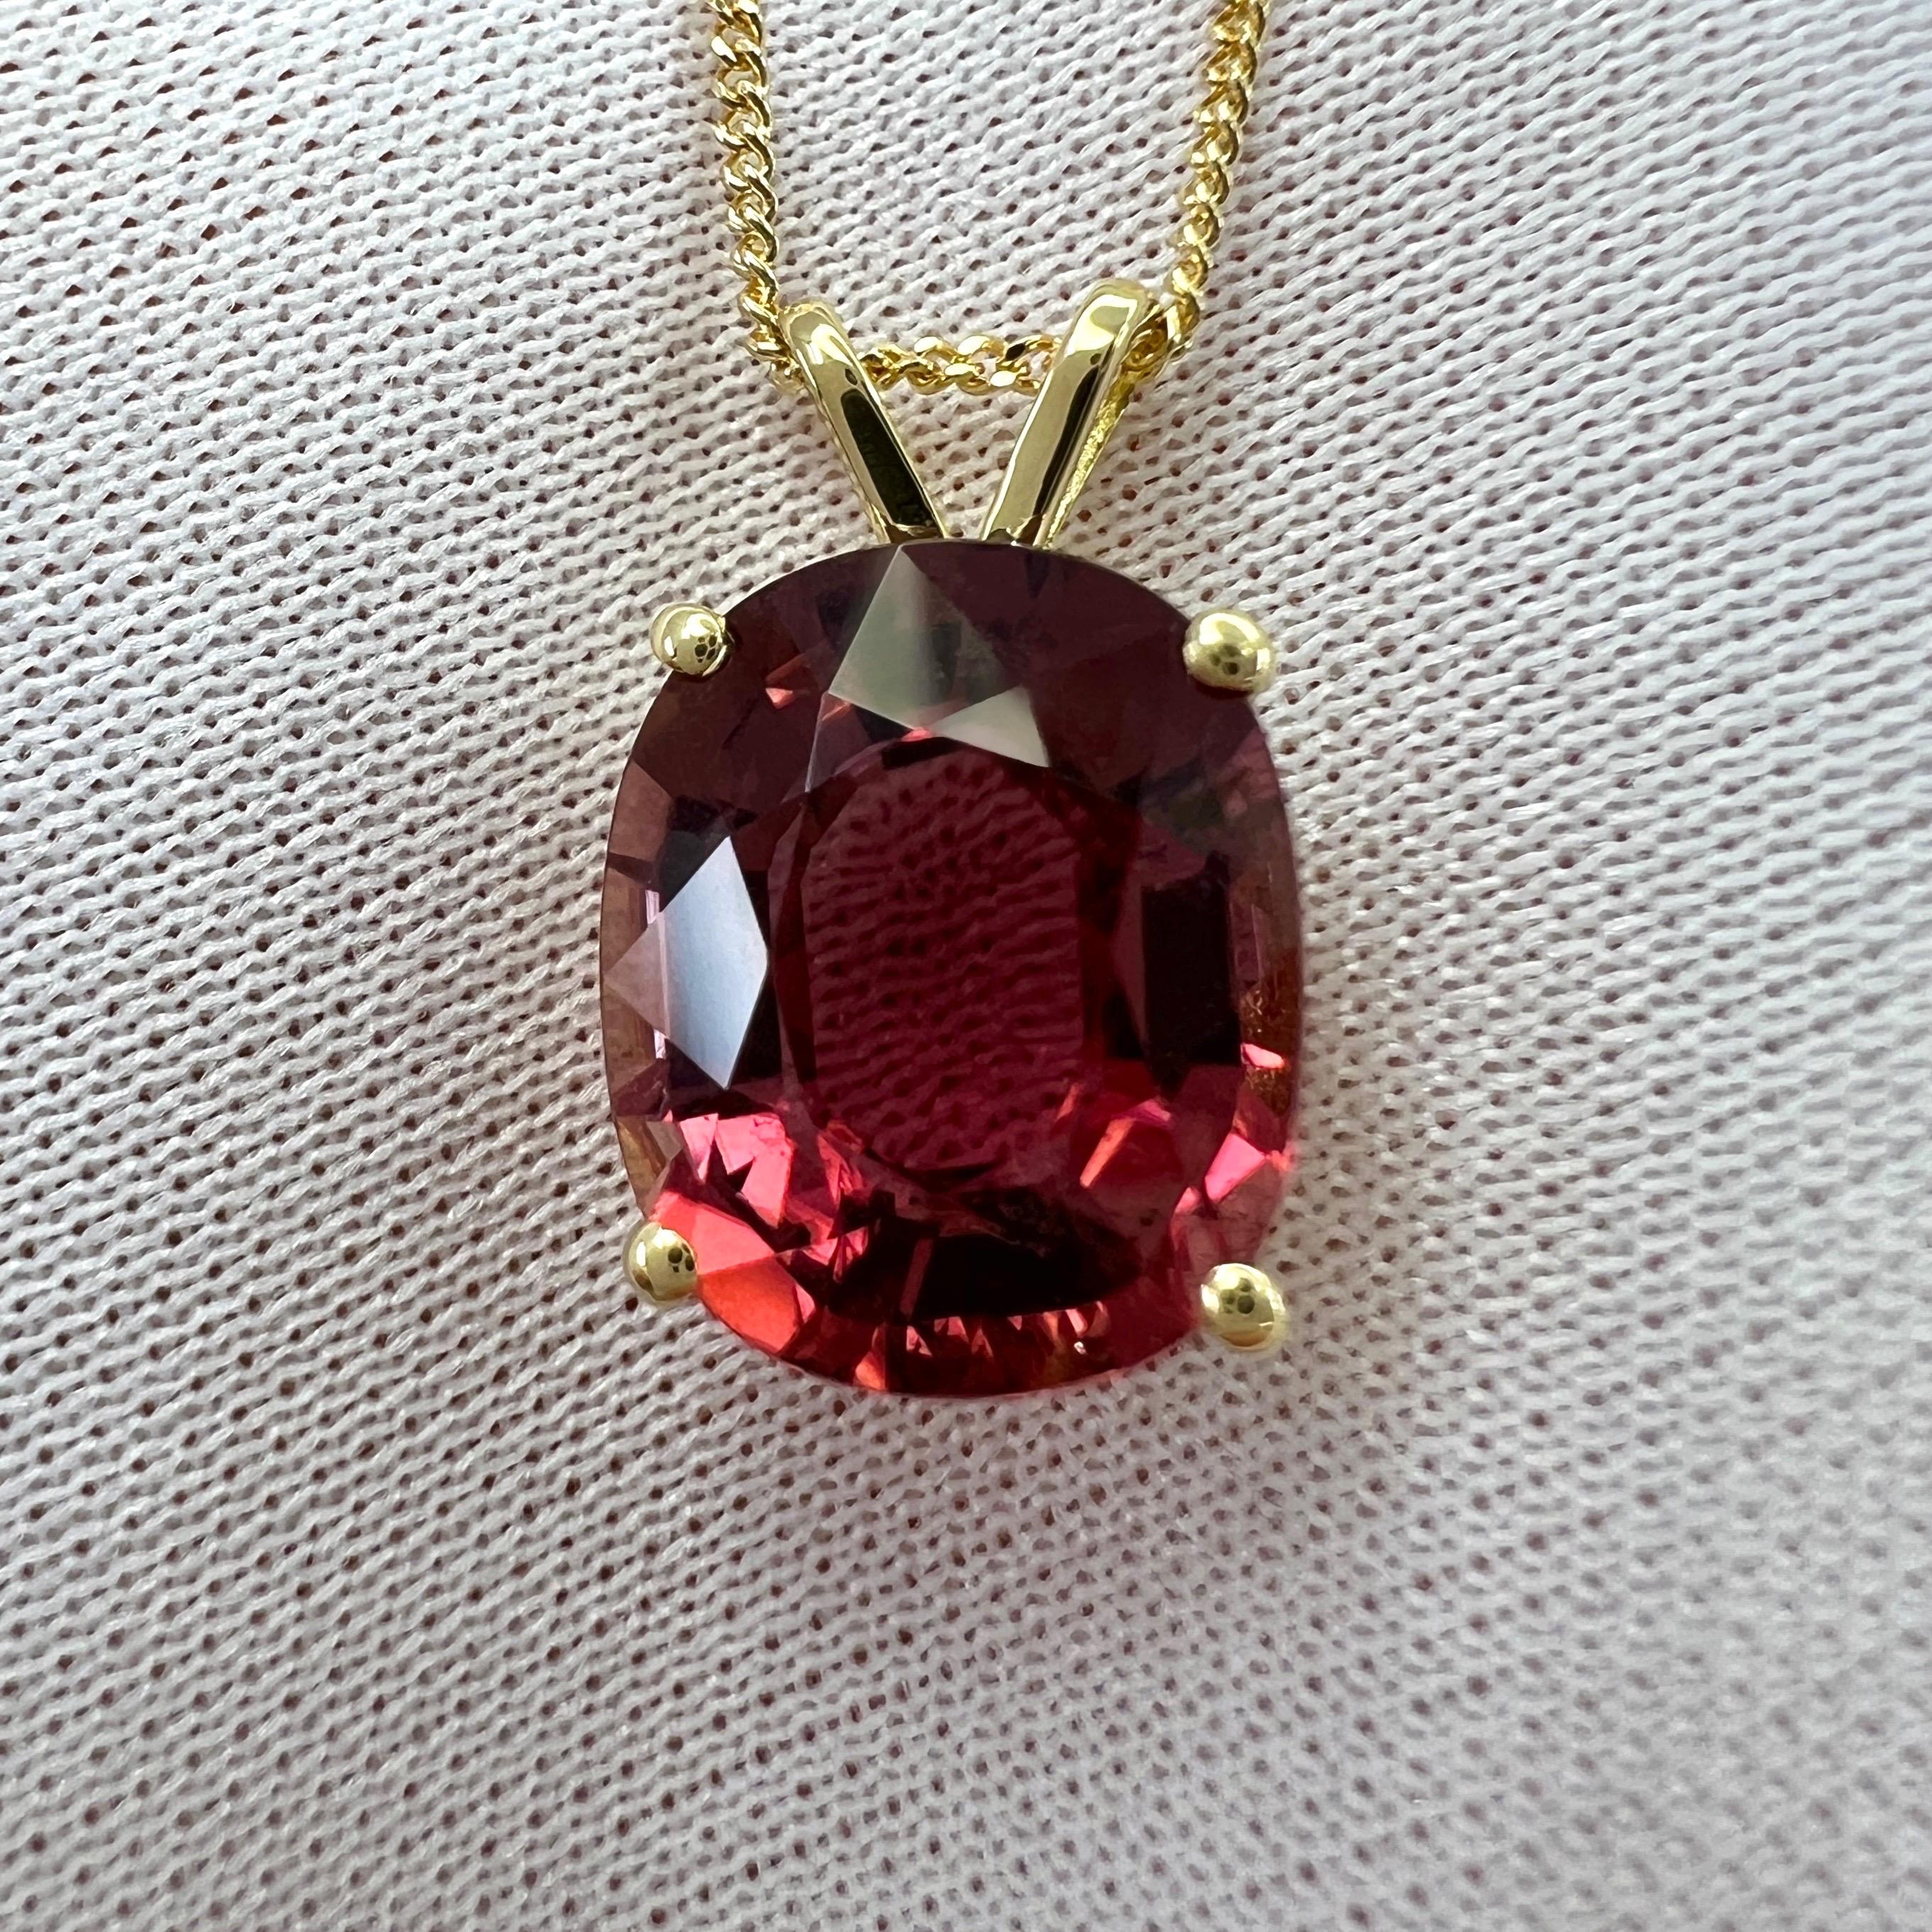 5.35ct Pink Orange Rubellite Tourmaline Oval 18k Yellow Gold Pendant Necklace For Sale 3